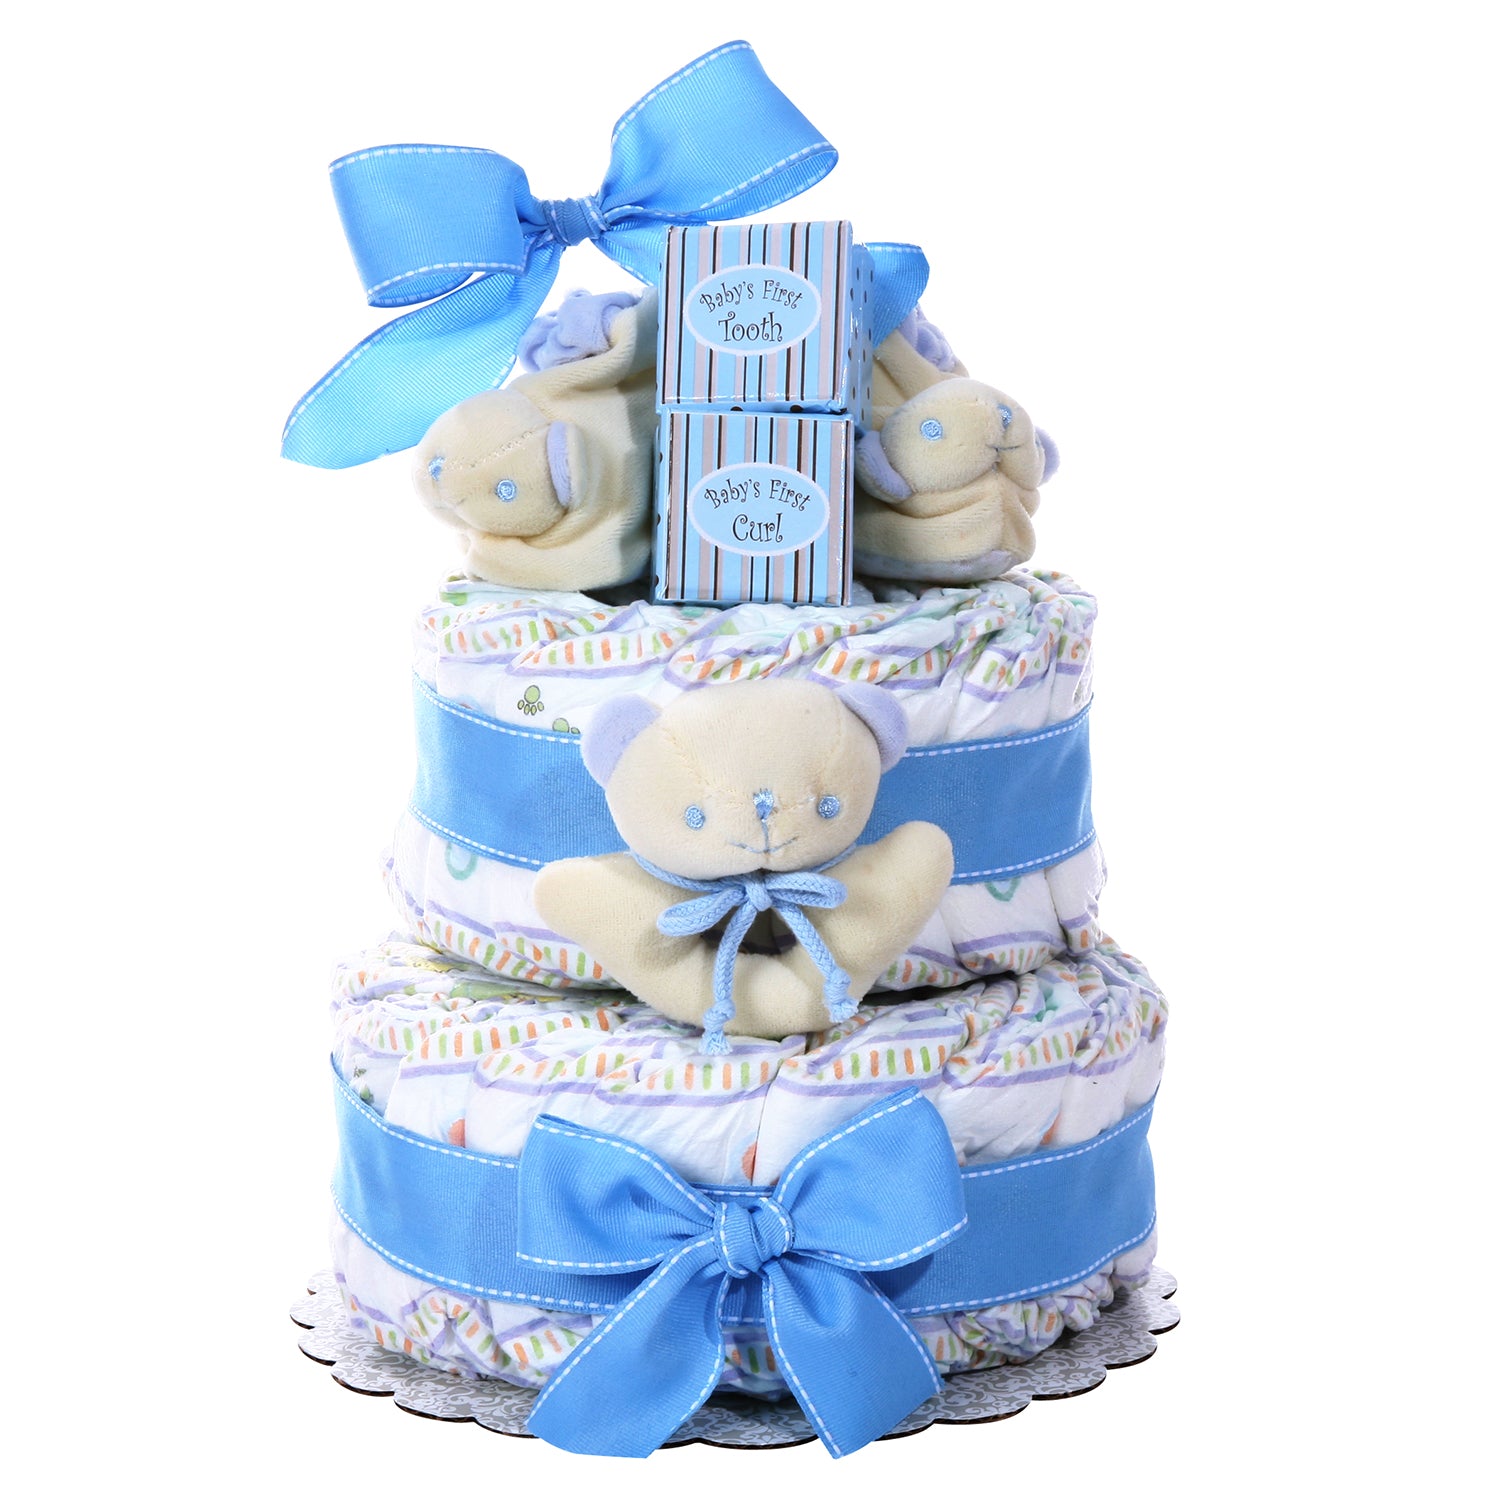 40 Huggies Diapers (Size 2), Baby's First Tooth Box, Baby's First Curl Box, Baby Booties, Rattle configured into a 3-tiered cake with blue ribbons,